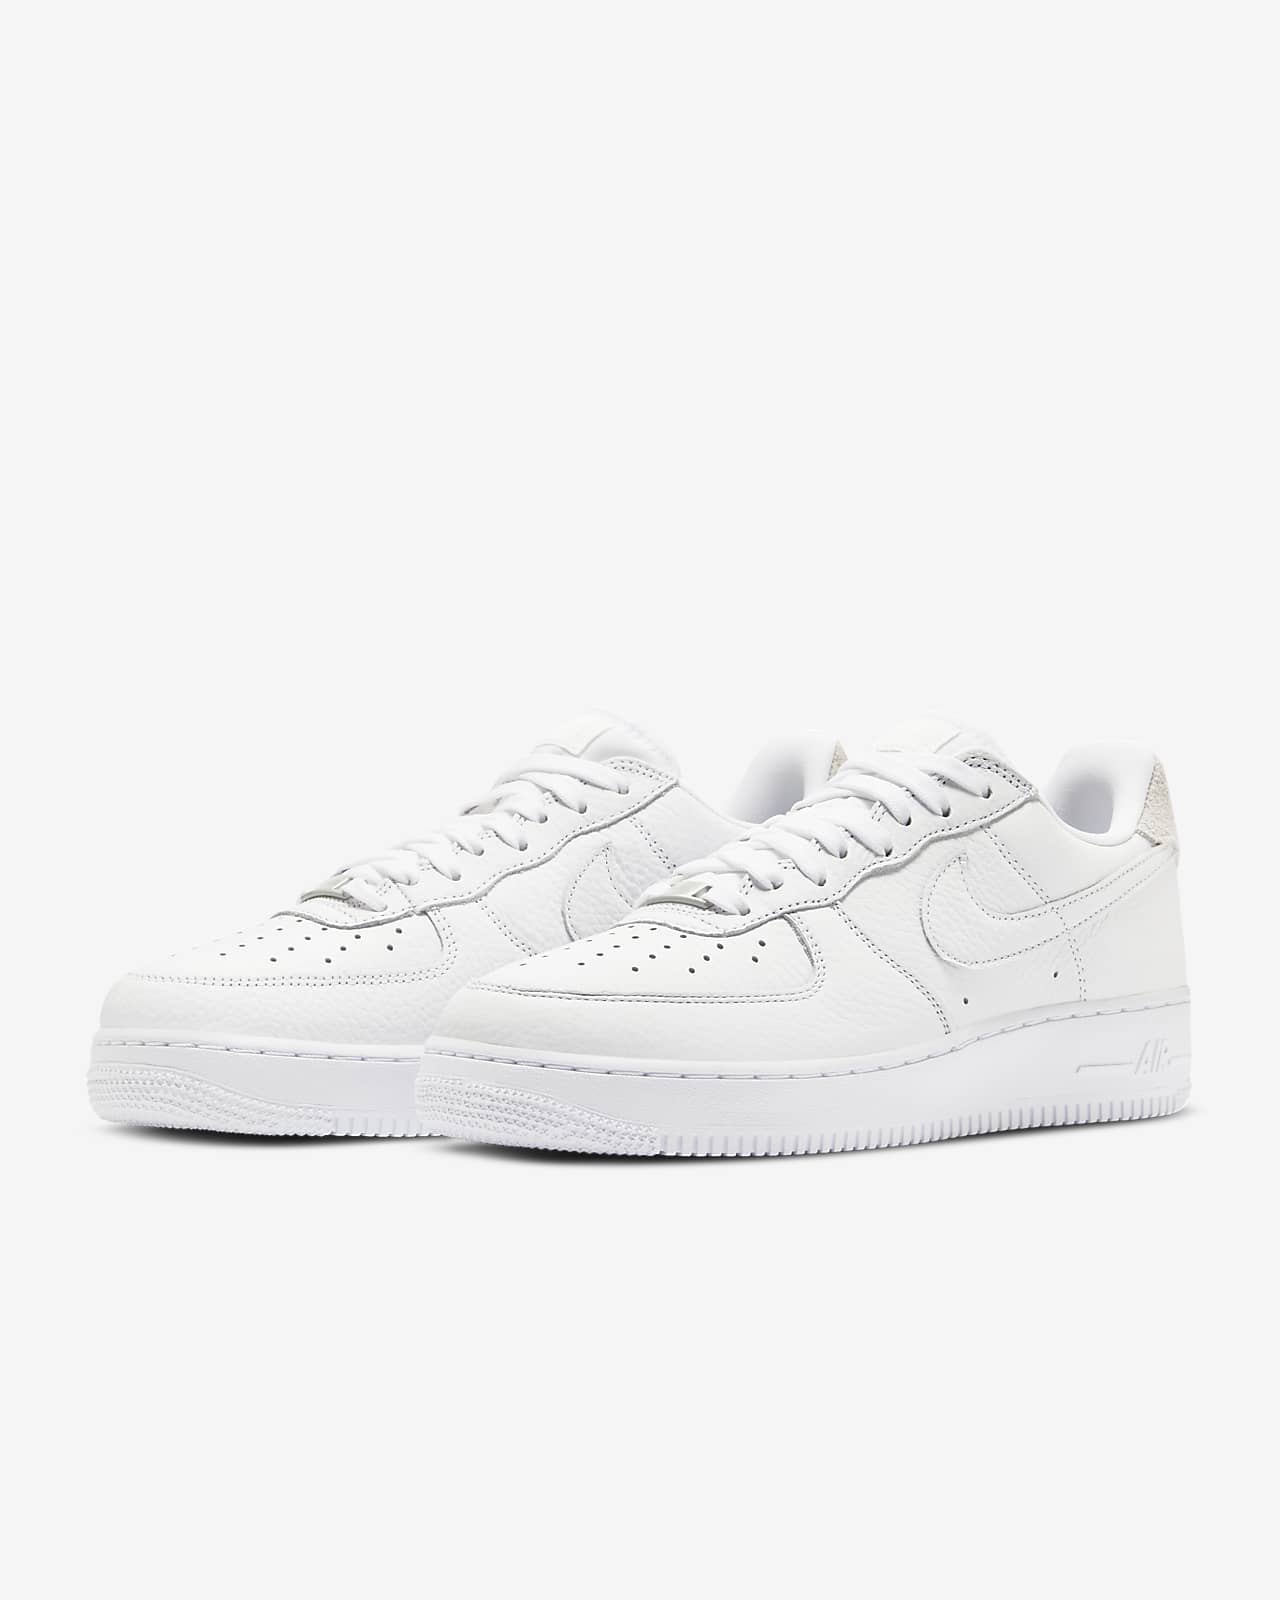 nike shoes that look like air force 1